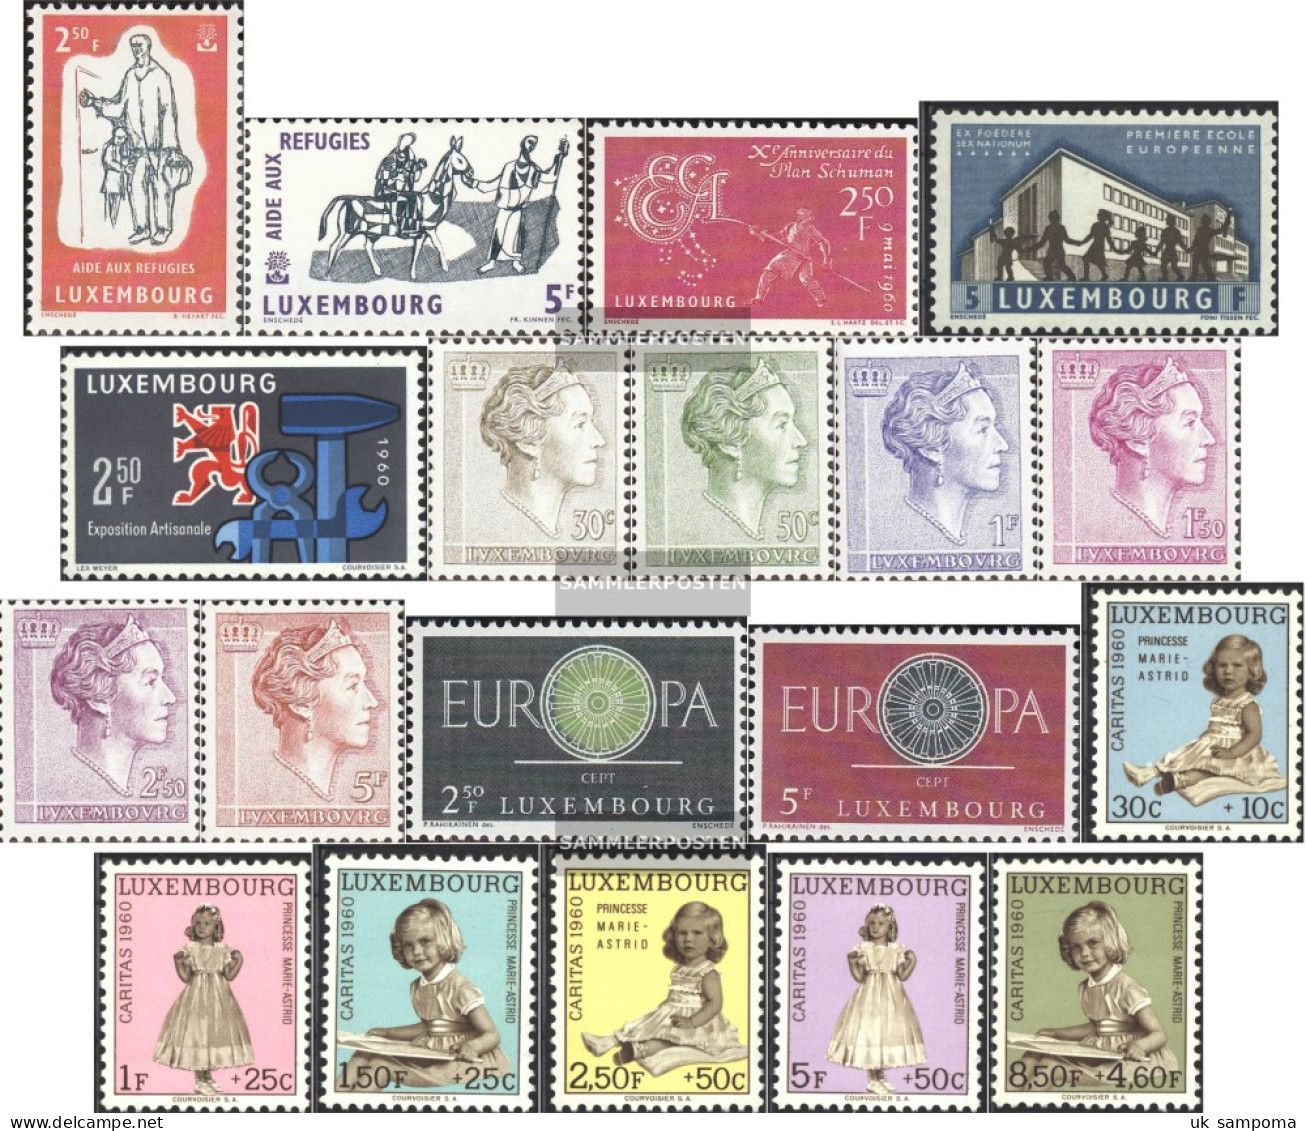 Luxembourg Unmounted Mint / Never Hinged Refugee Years 1960 RefUgee YeArs, CAritAs EUrope U.A - Neufs